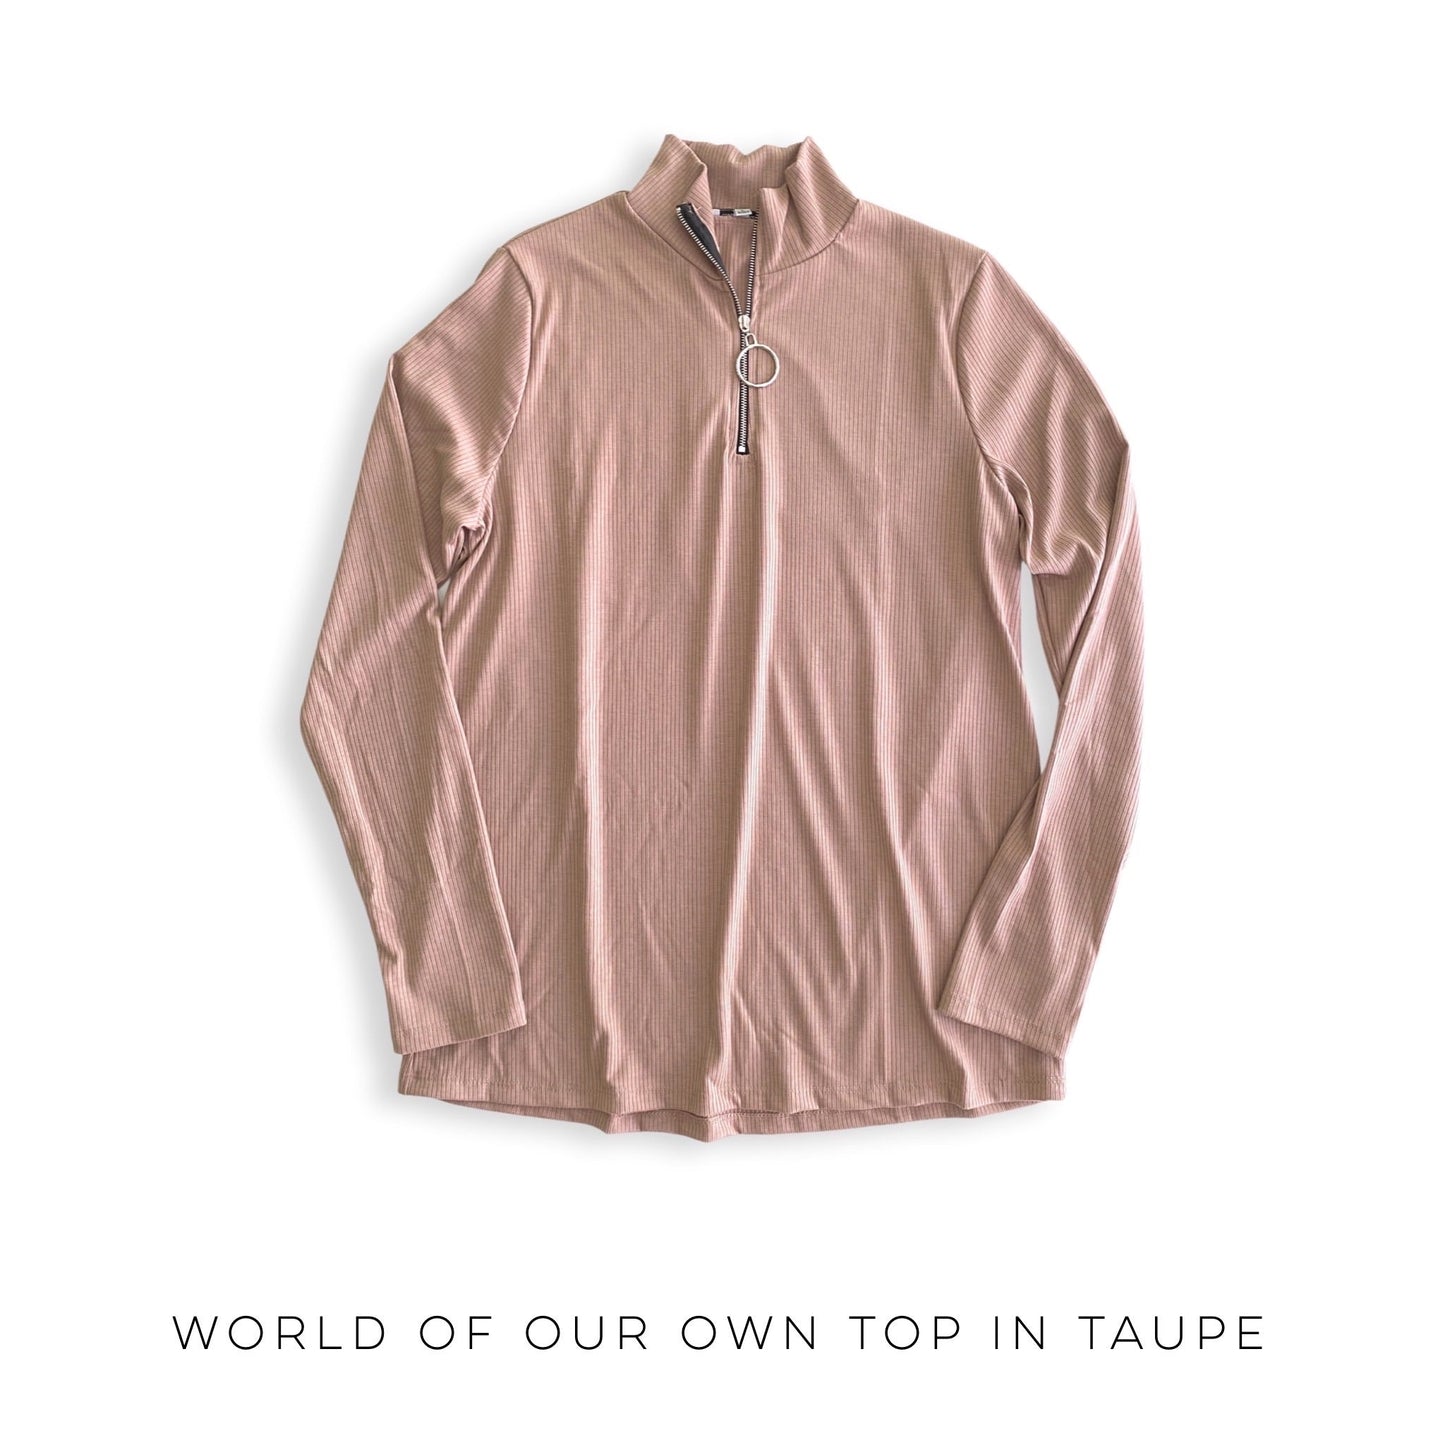 World of Our Own Top in Taupe